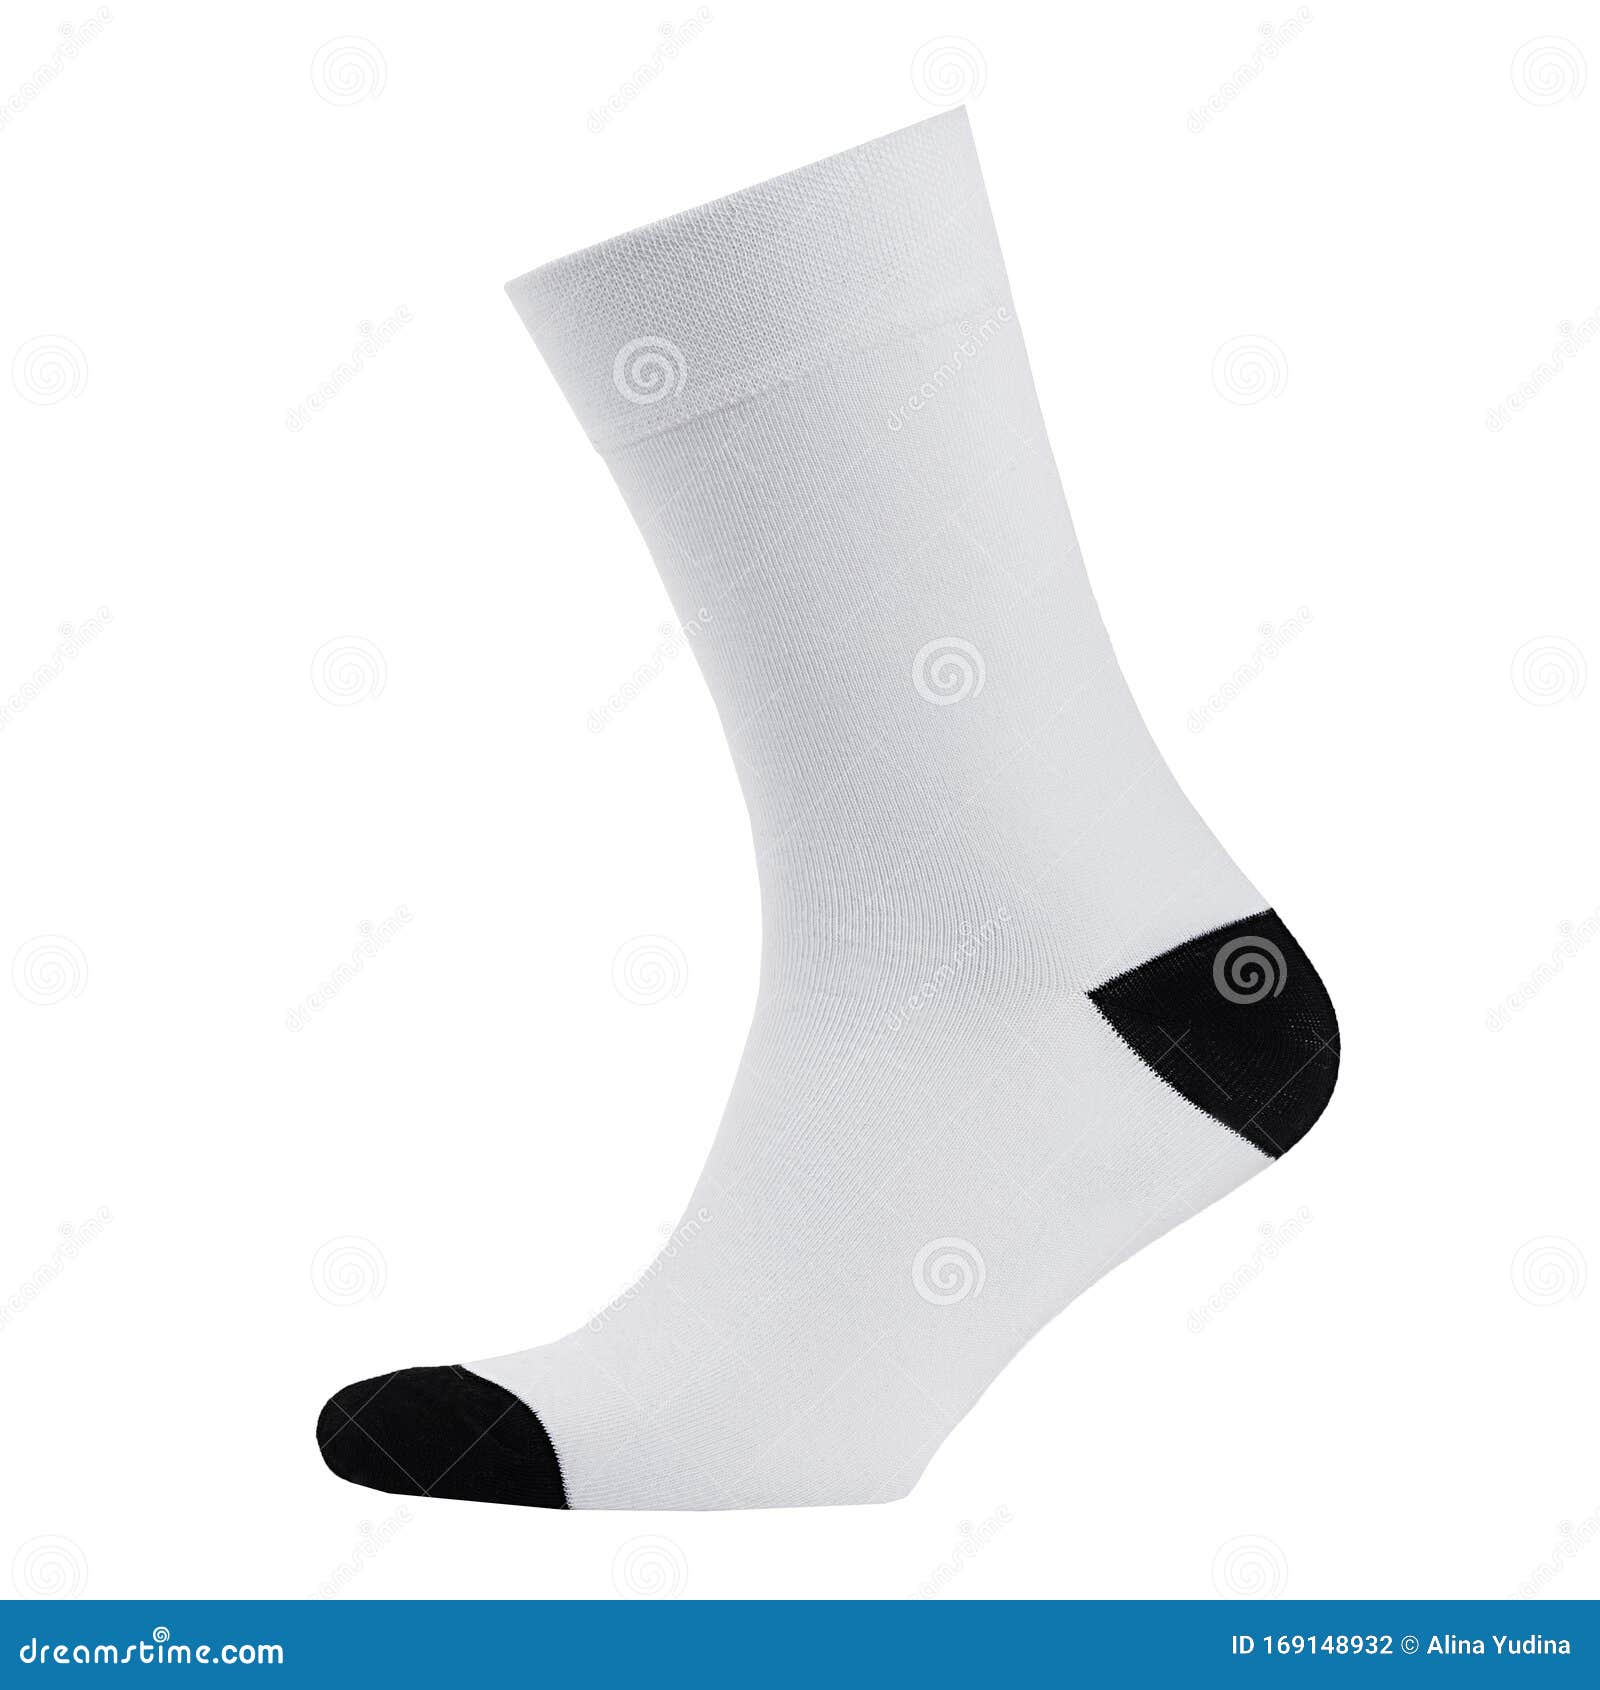 blank white cotton long sock with black heel on invisible  foot  on white background as mock up for advertising, branding.